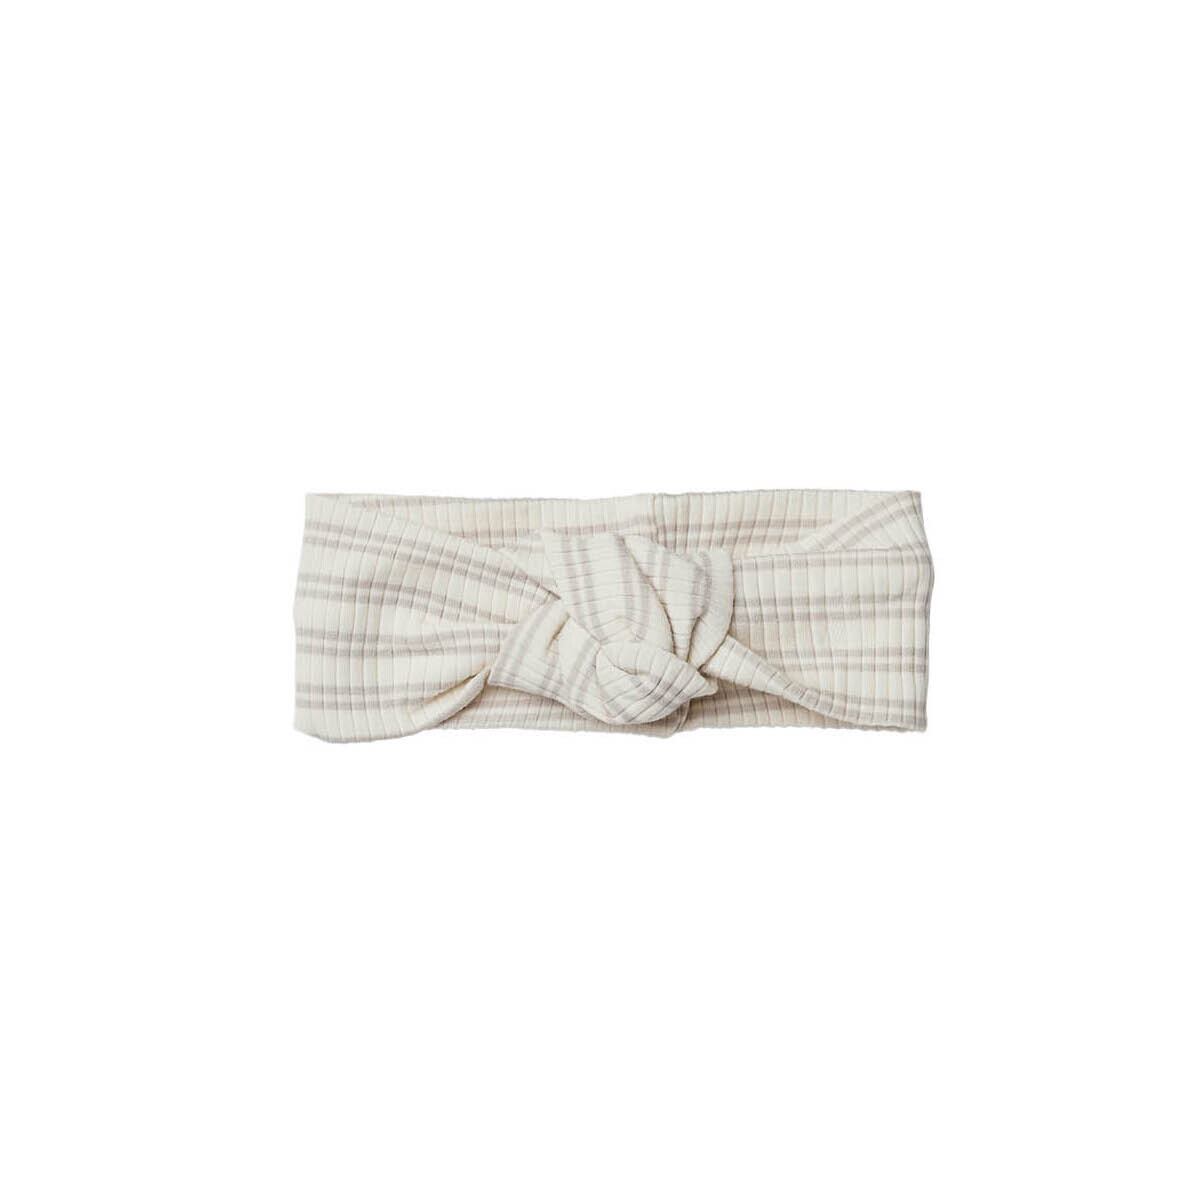 Ribbed Knotted Headband / silver stripe